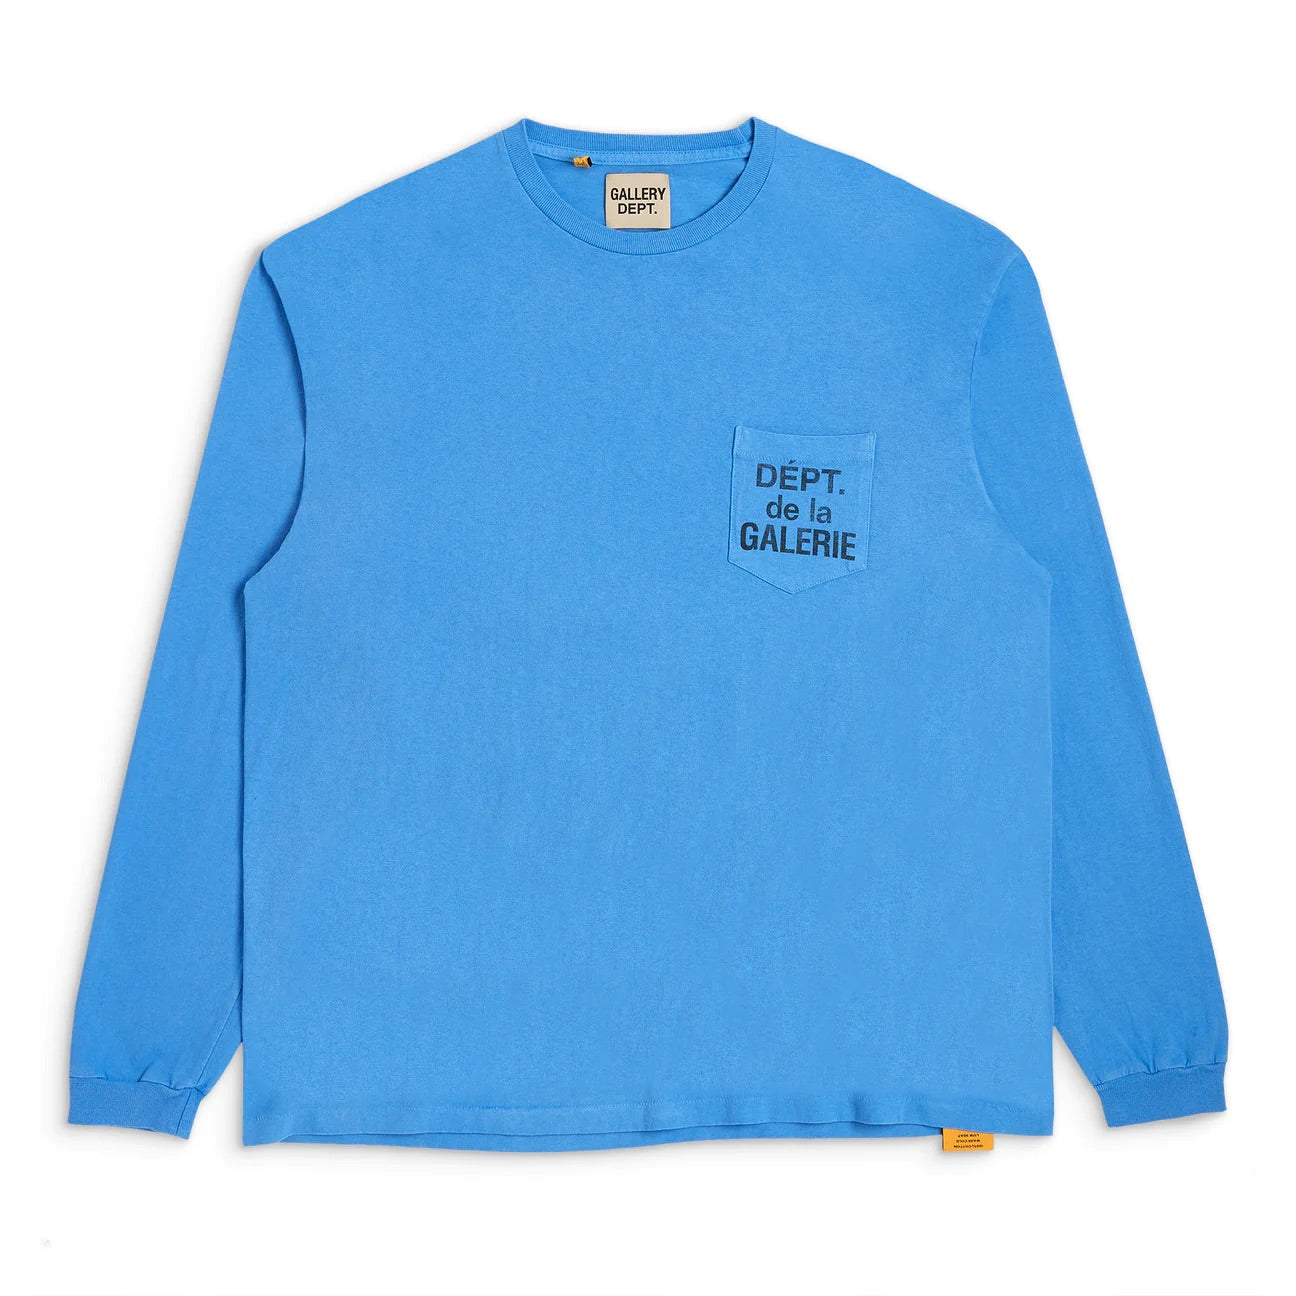 GALLERY DEPT FRENCH LOGO LONG SLEEVE BLUE